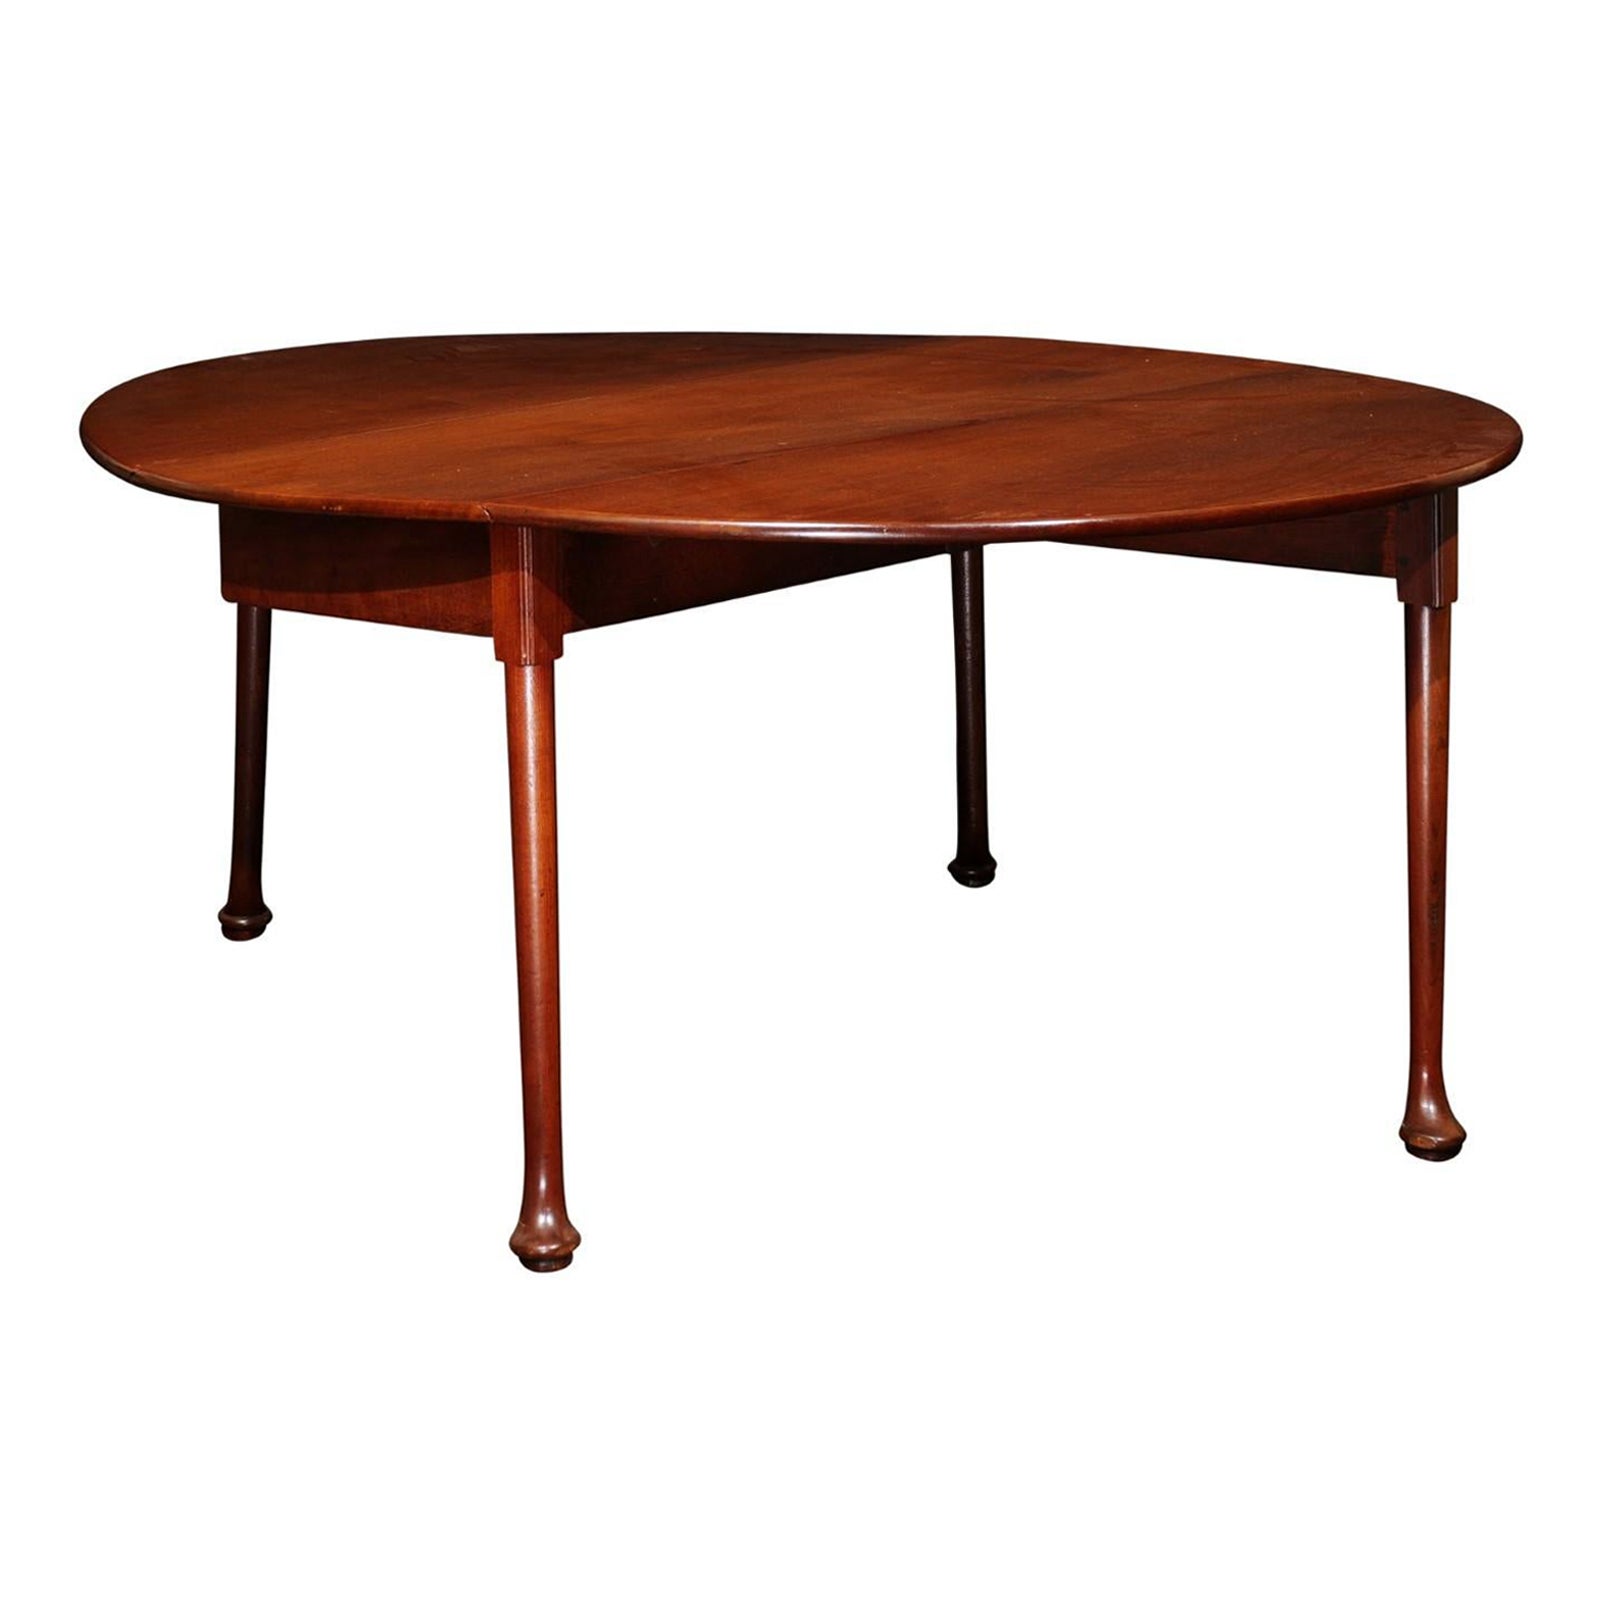  Mid-18th C English George II Mahogany Drop Leaf Oval Dining Table with Pad Feet (Table de salle à manger ovale à feuilles tombantes et pieds pad) en vente